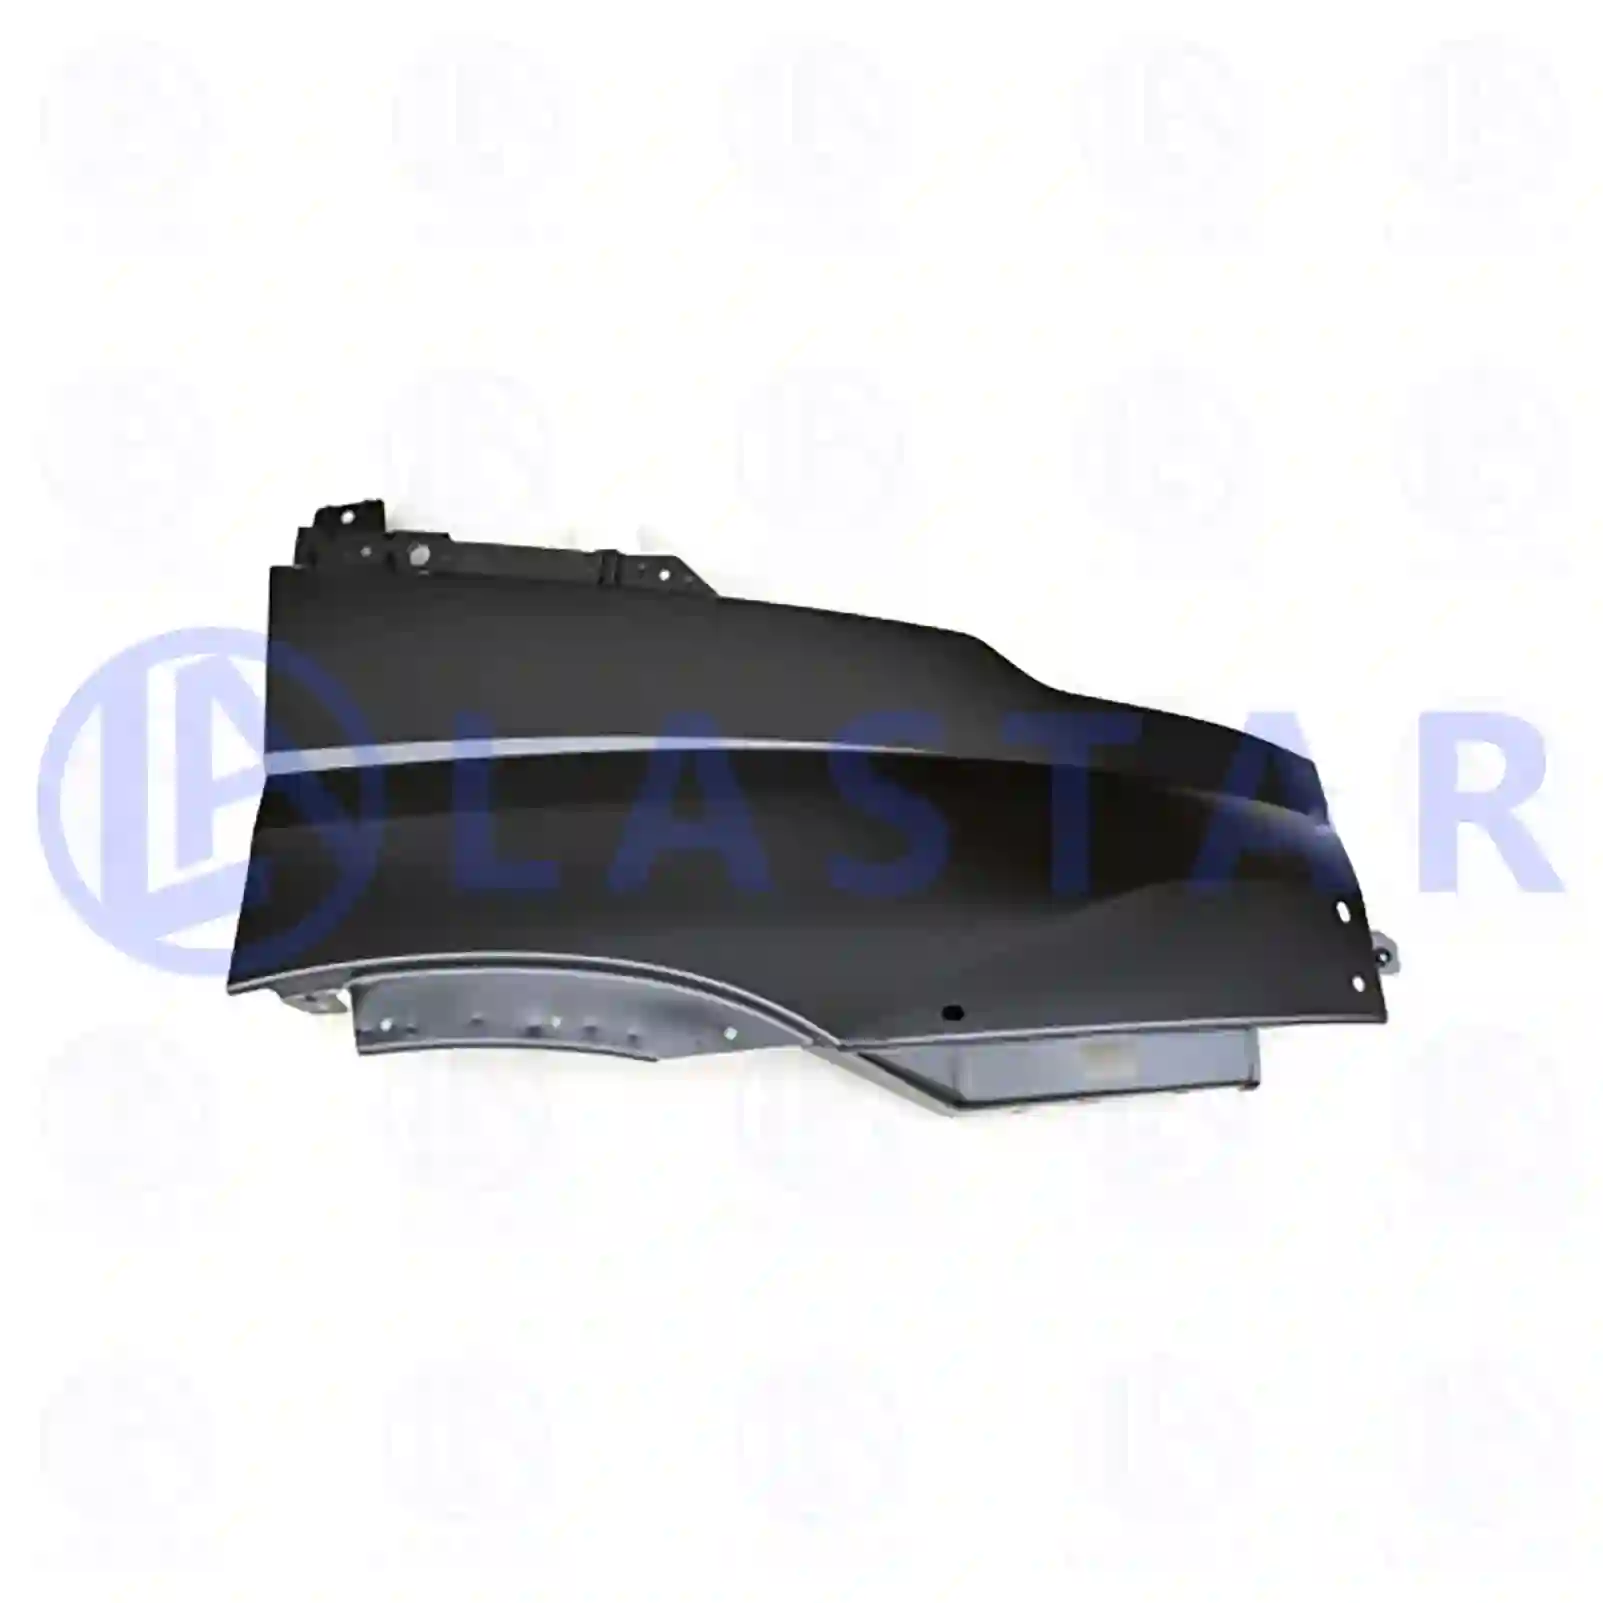 Fender, front, right, 77720773, 5801513999 ||  77720773 Lastar Spare Part | Truck Spare Parts, Auotomotive Spare Parts Fender, front, right, 77720773, 5801513999 ||  77720773 Lastar Spare Part | Truck Spare Parts, Auotomotive Spare Parts